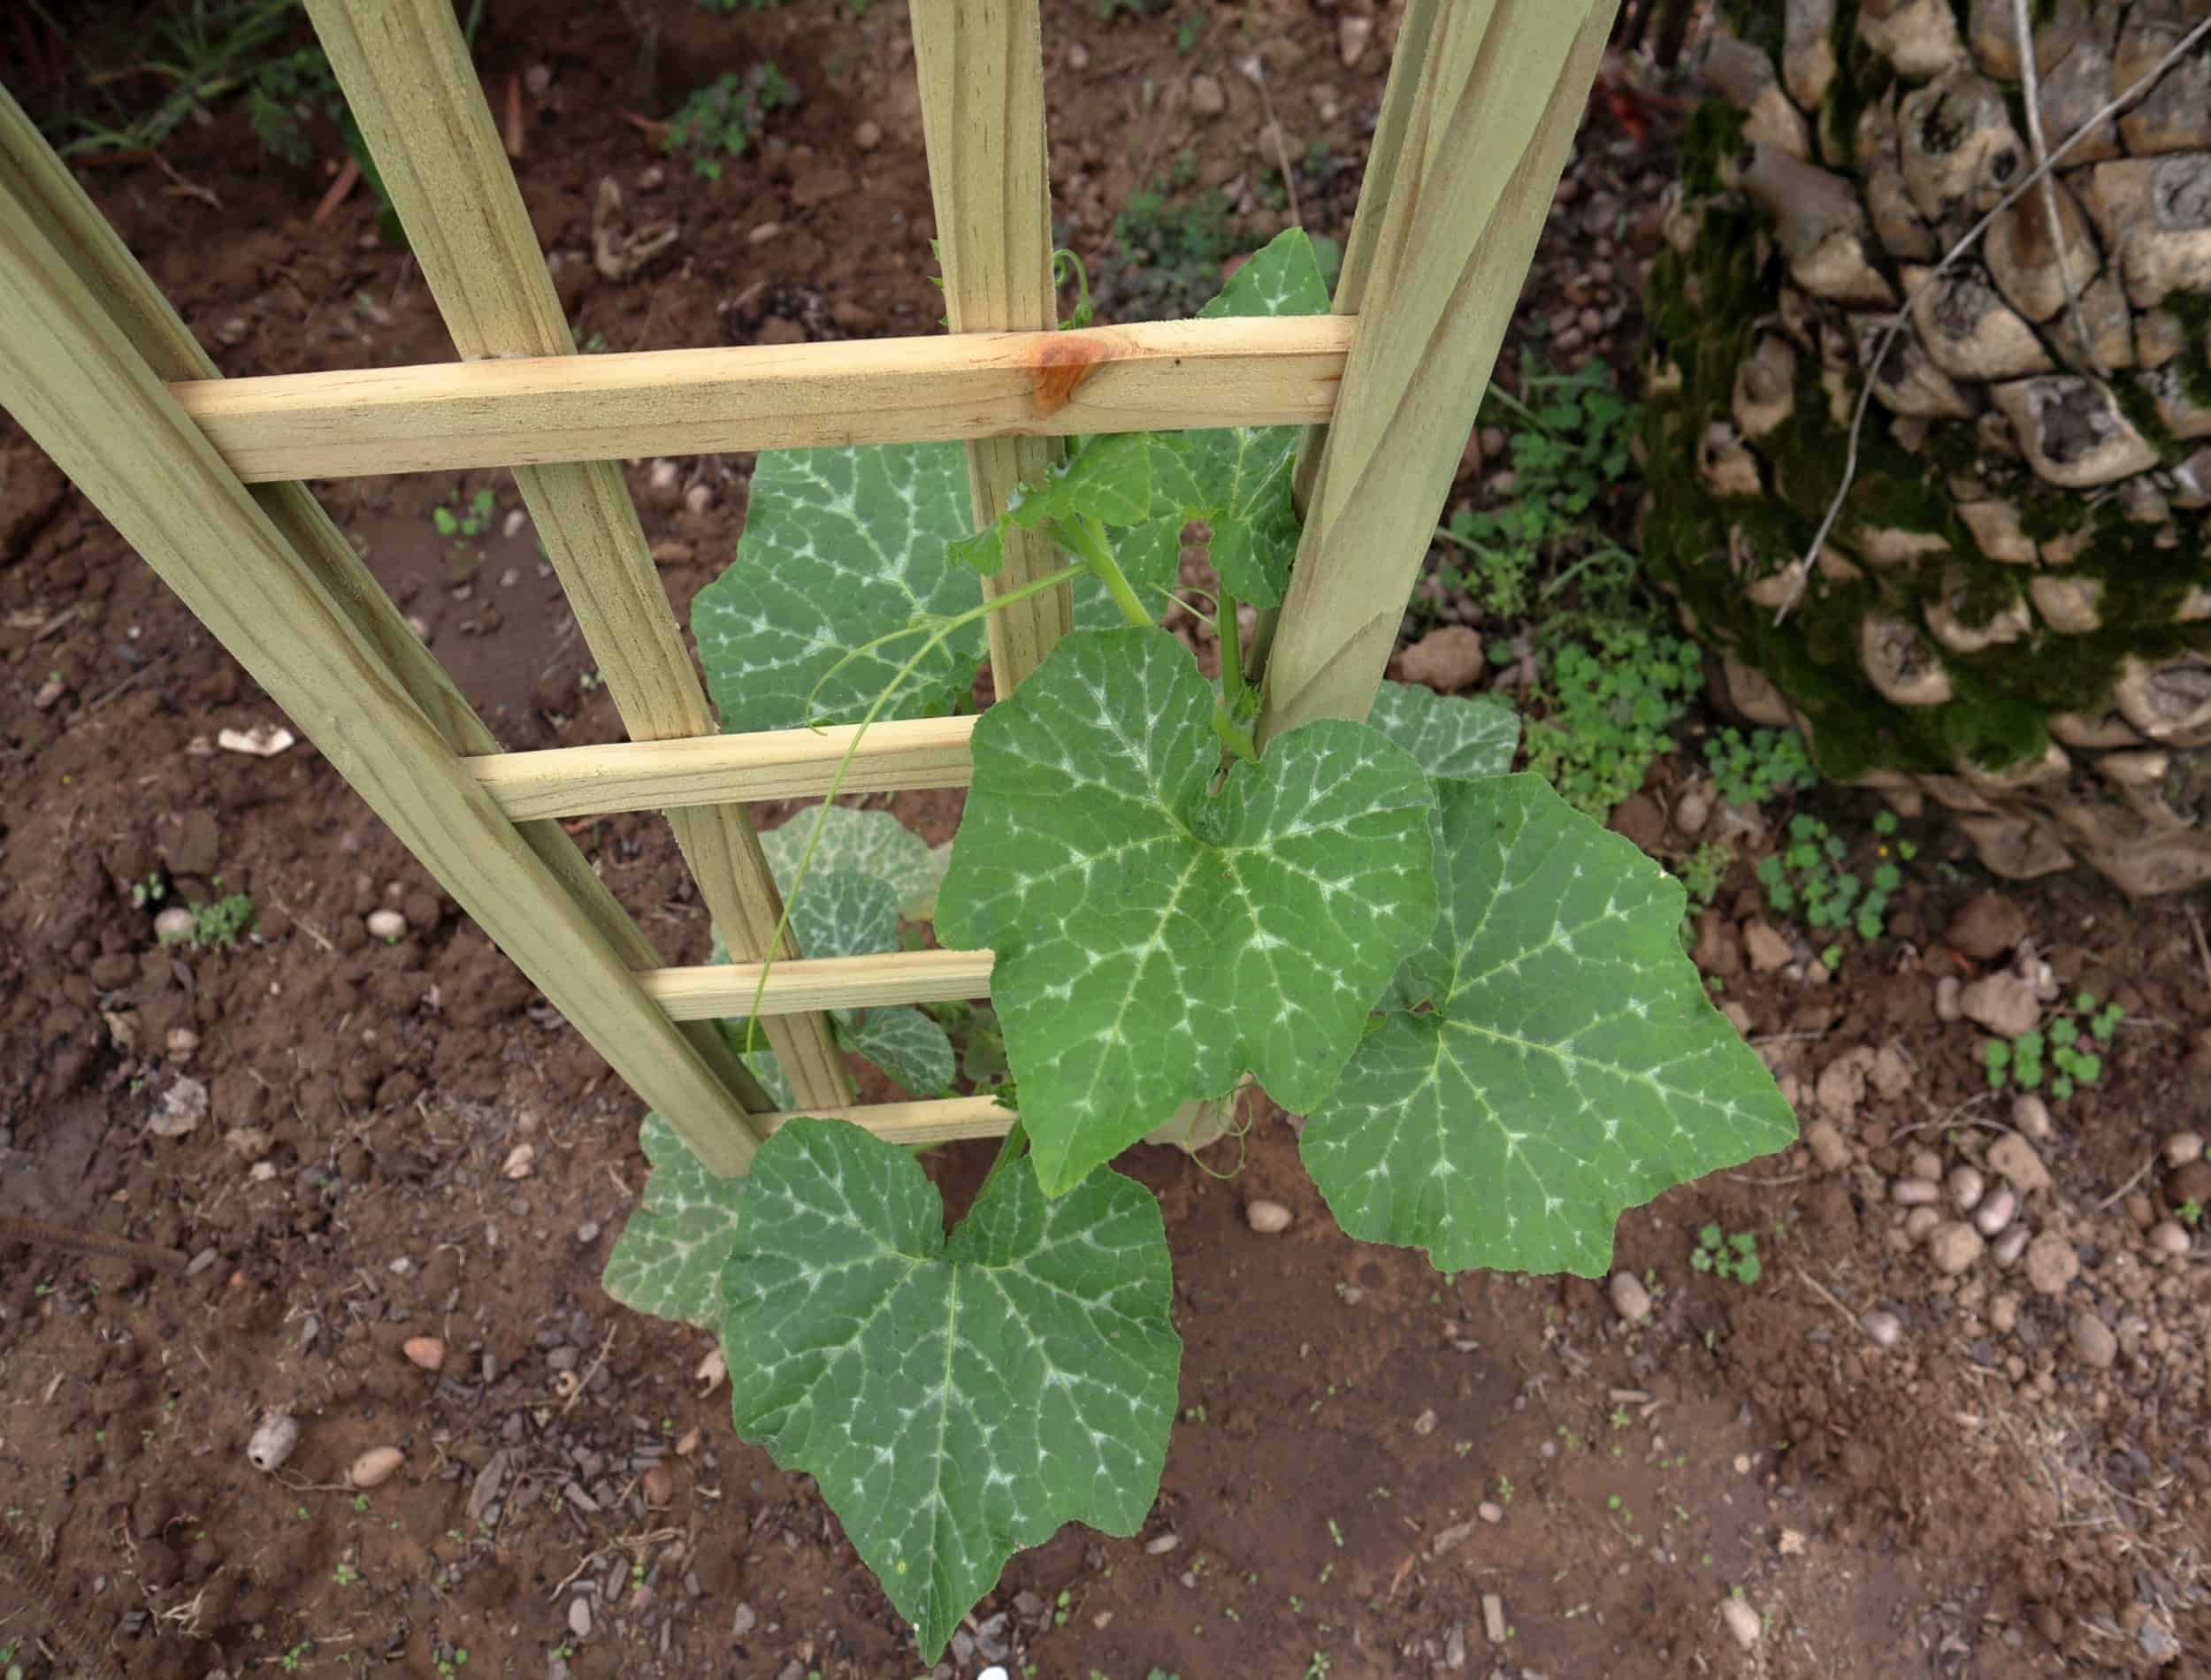 Growing butternut vertically on a trellis to promote more growth